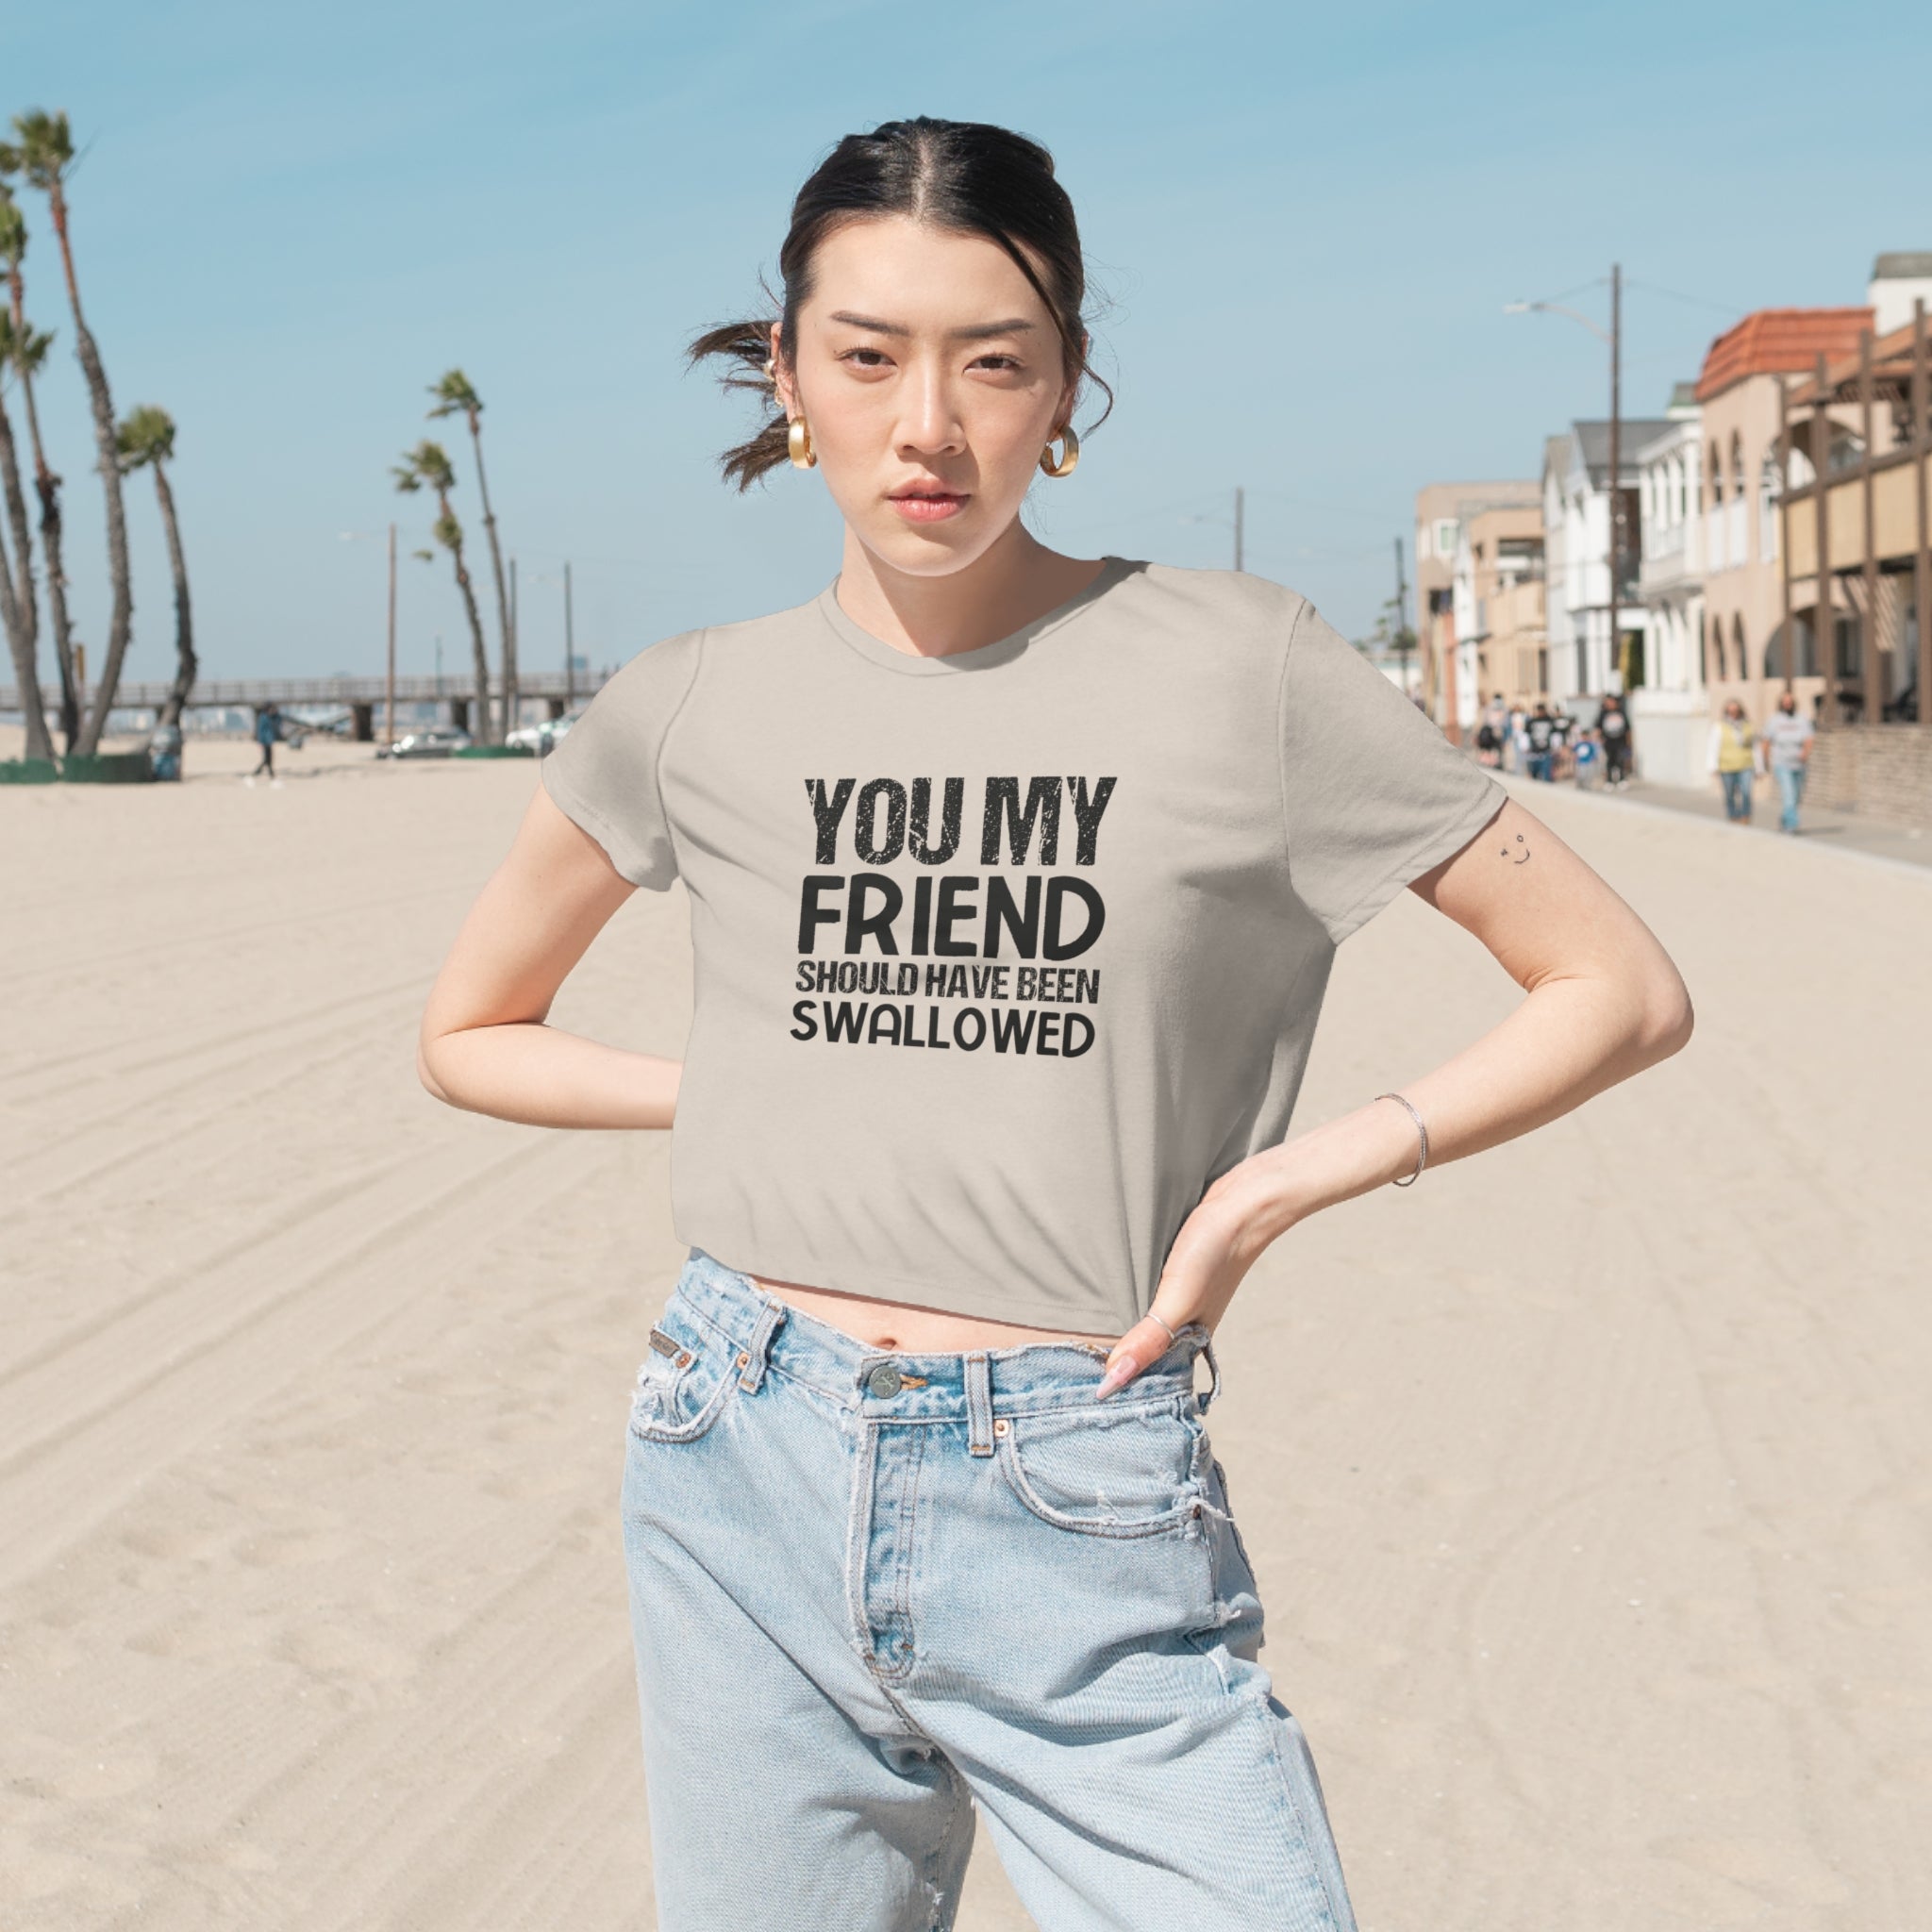 "You, My Friend, Should Have Been Swallowed" Hilarious Women's Flowy Cropped Tee - Edgy Humor, Cheeky Statement, Fashionable Crop Top Style